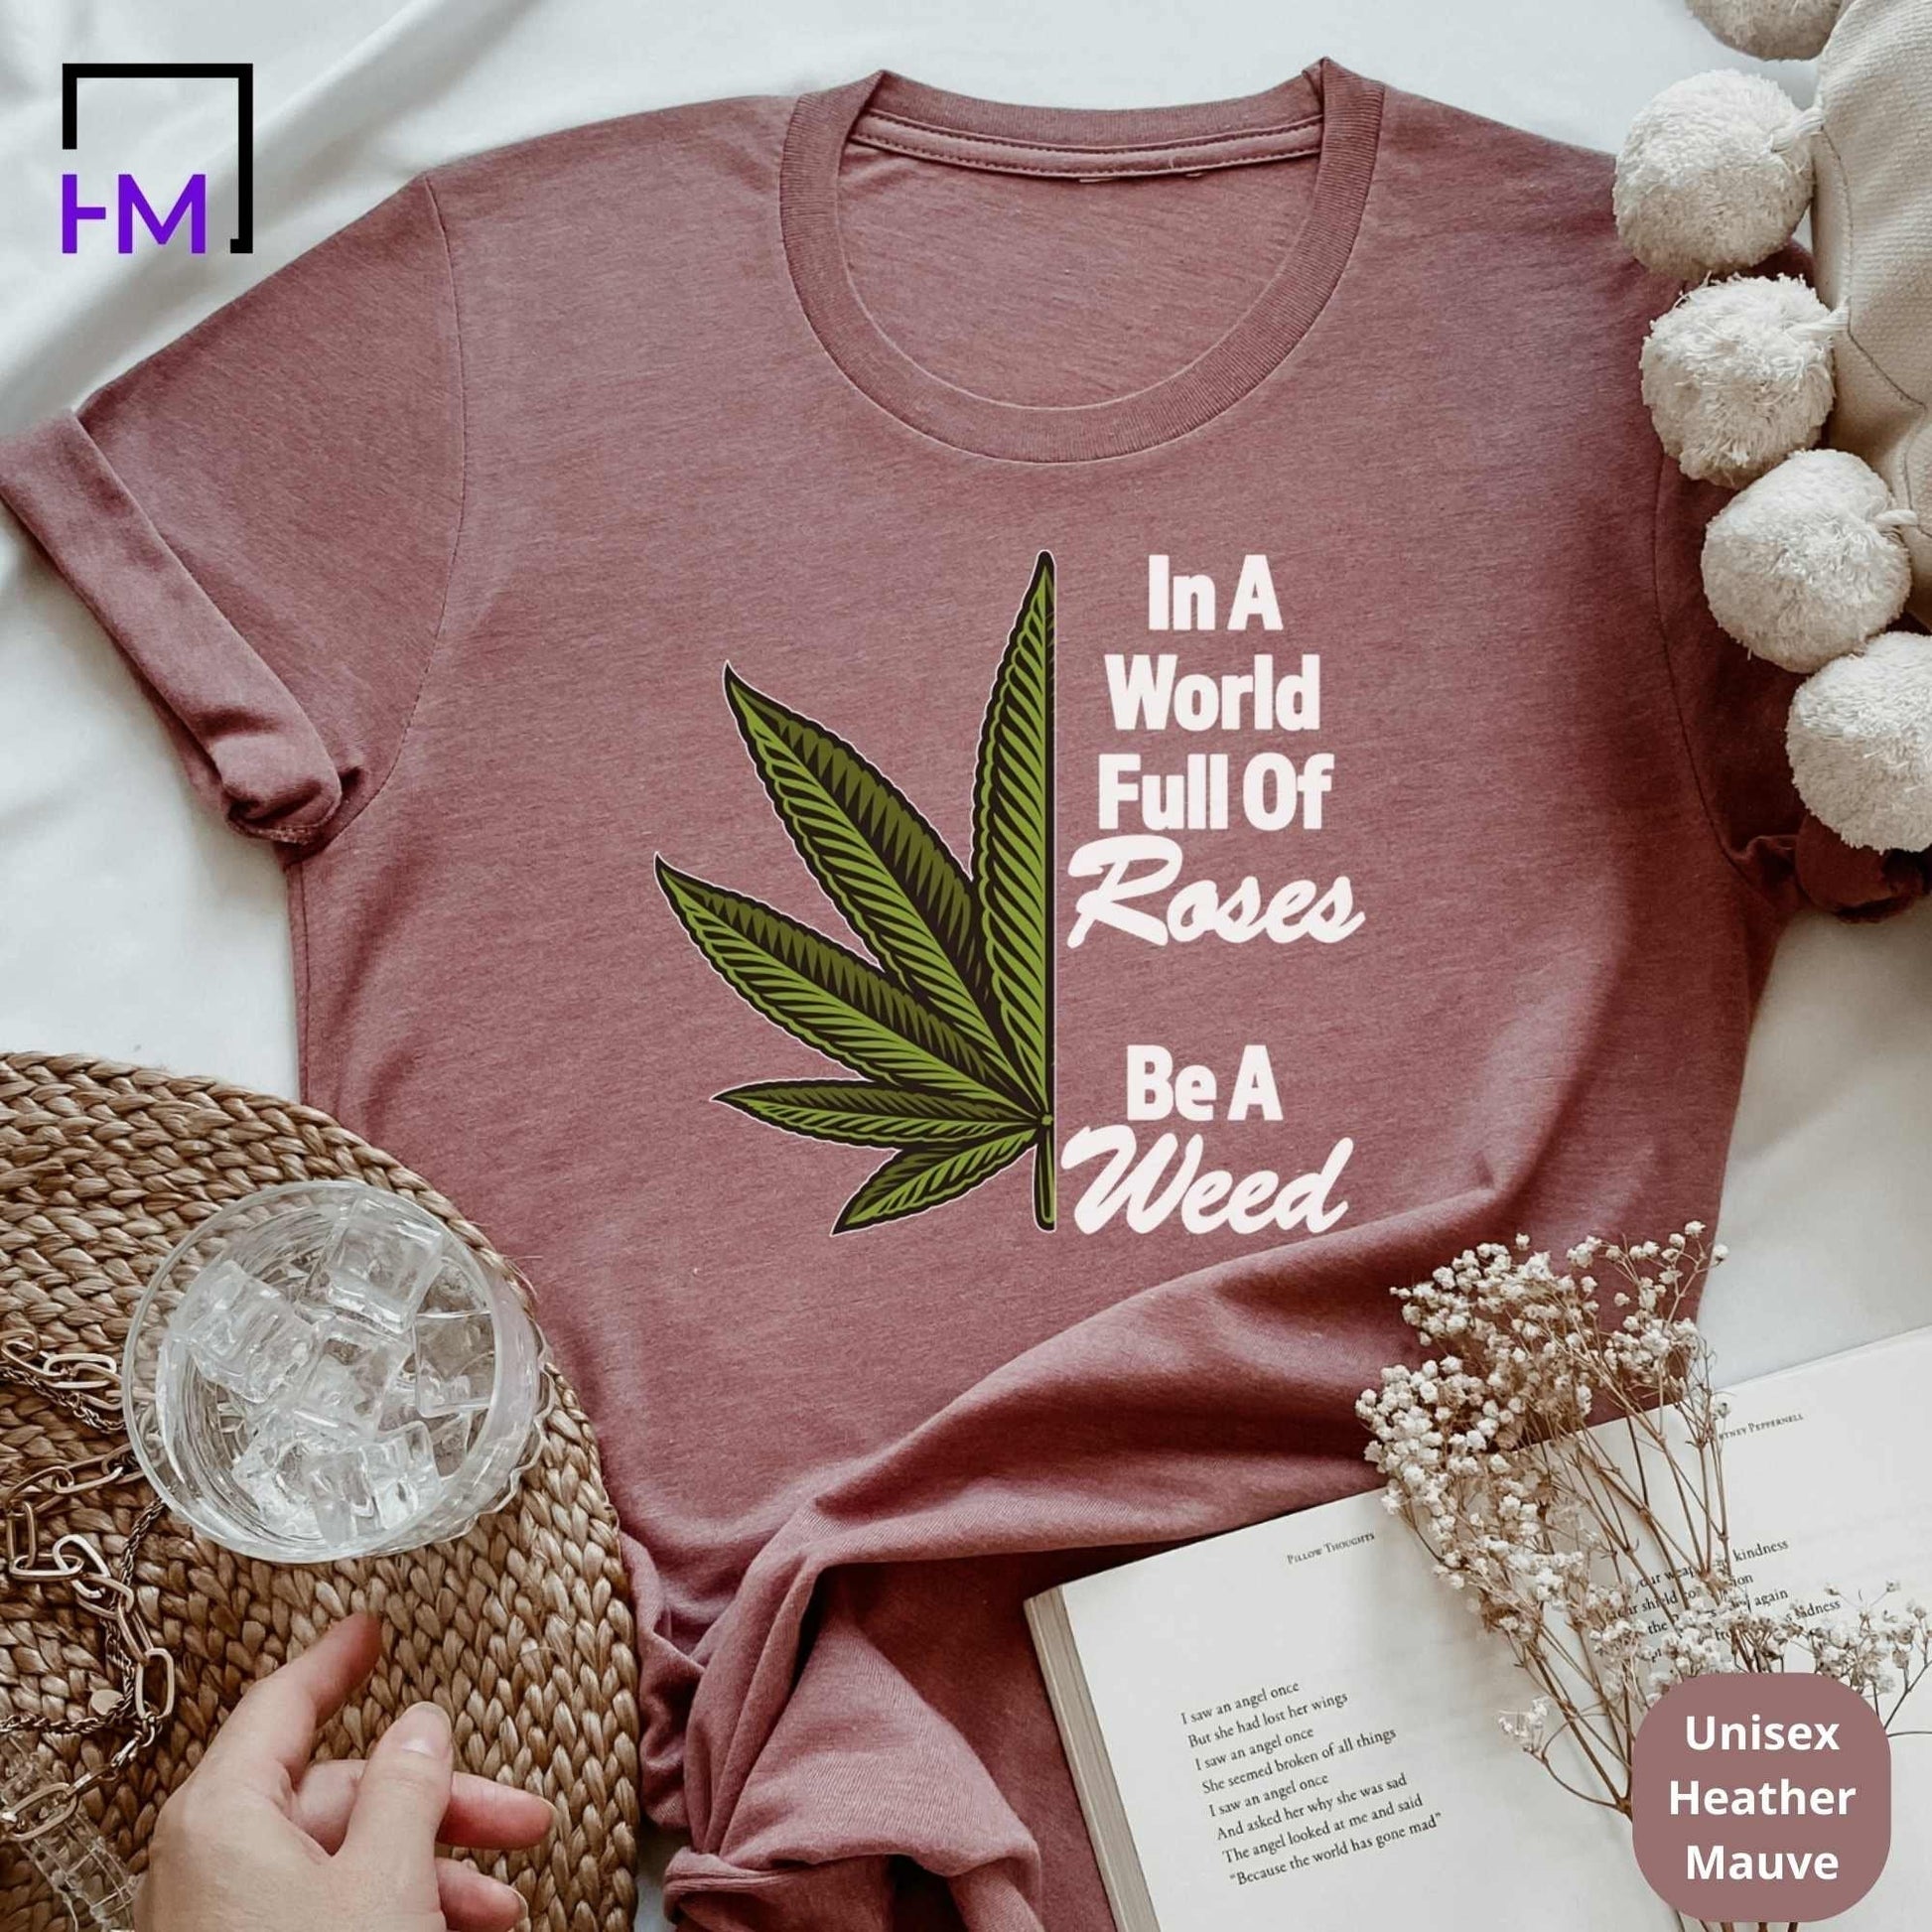 Stoner Gifts, Weed T Shirt, Stoner Girl Tee, Marijuana apparel, Cannabis Clothing, Gift for Her, Hippie Accessories, 420 Gift, Mary Jane